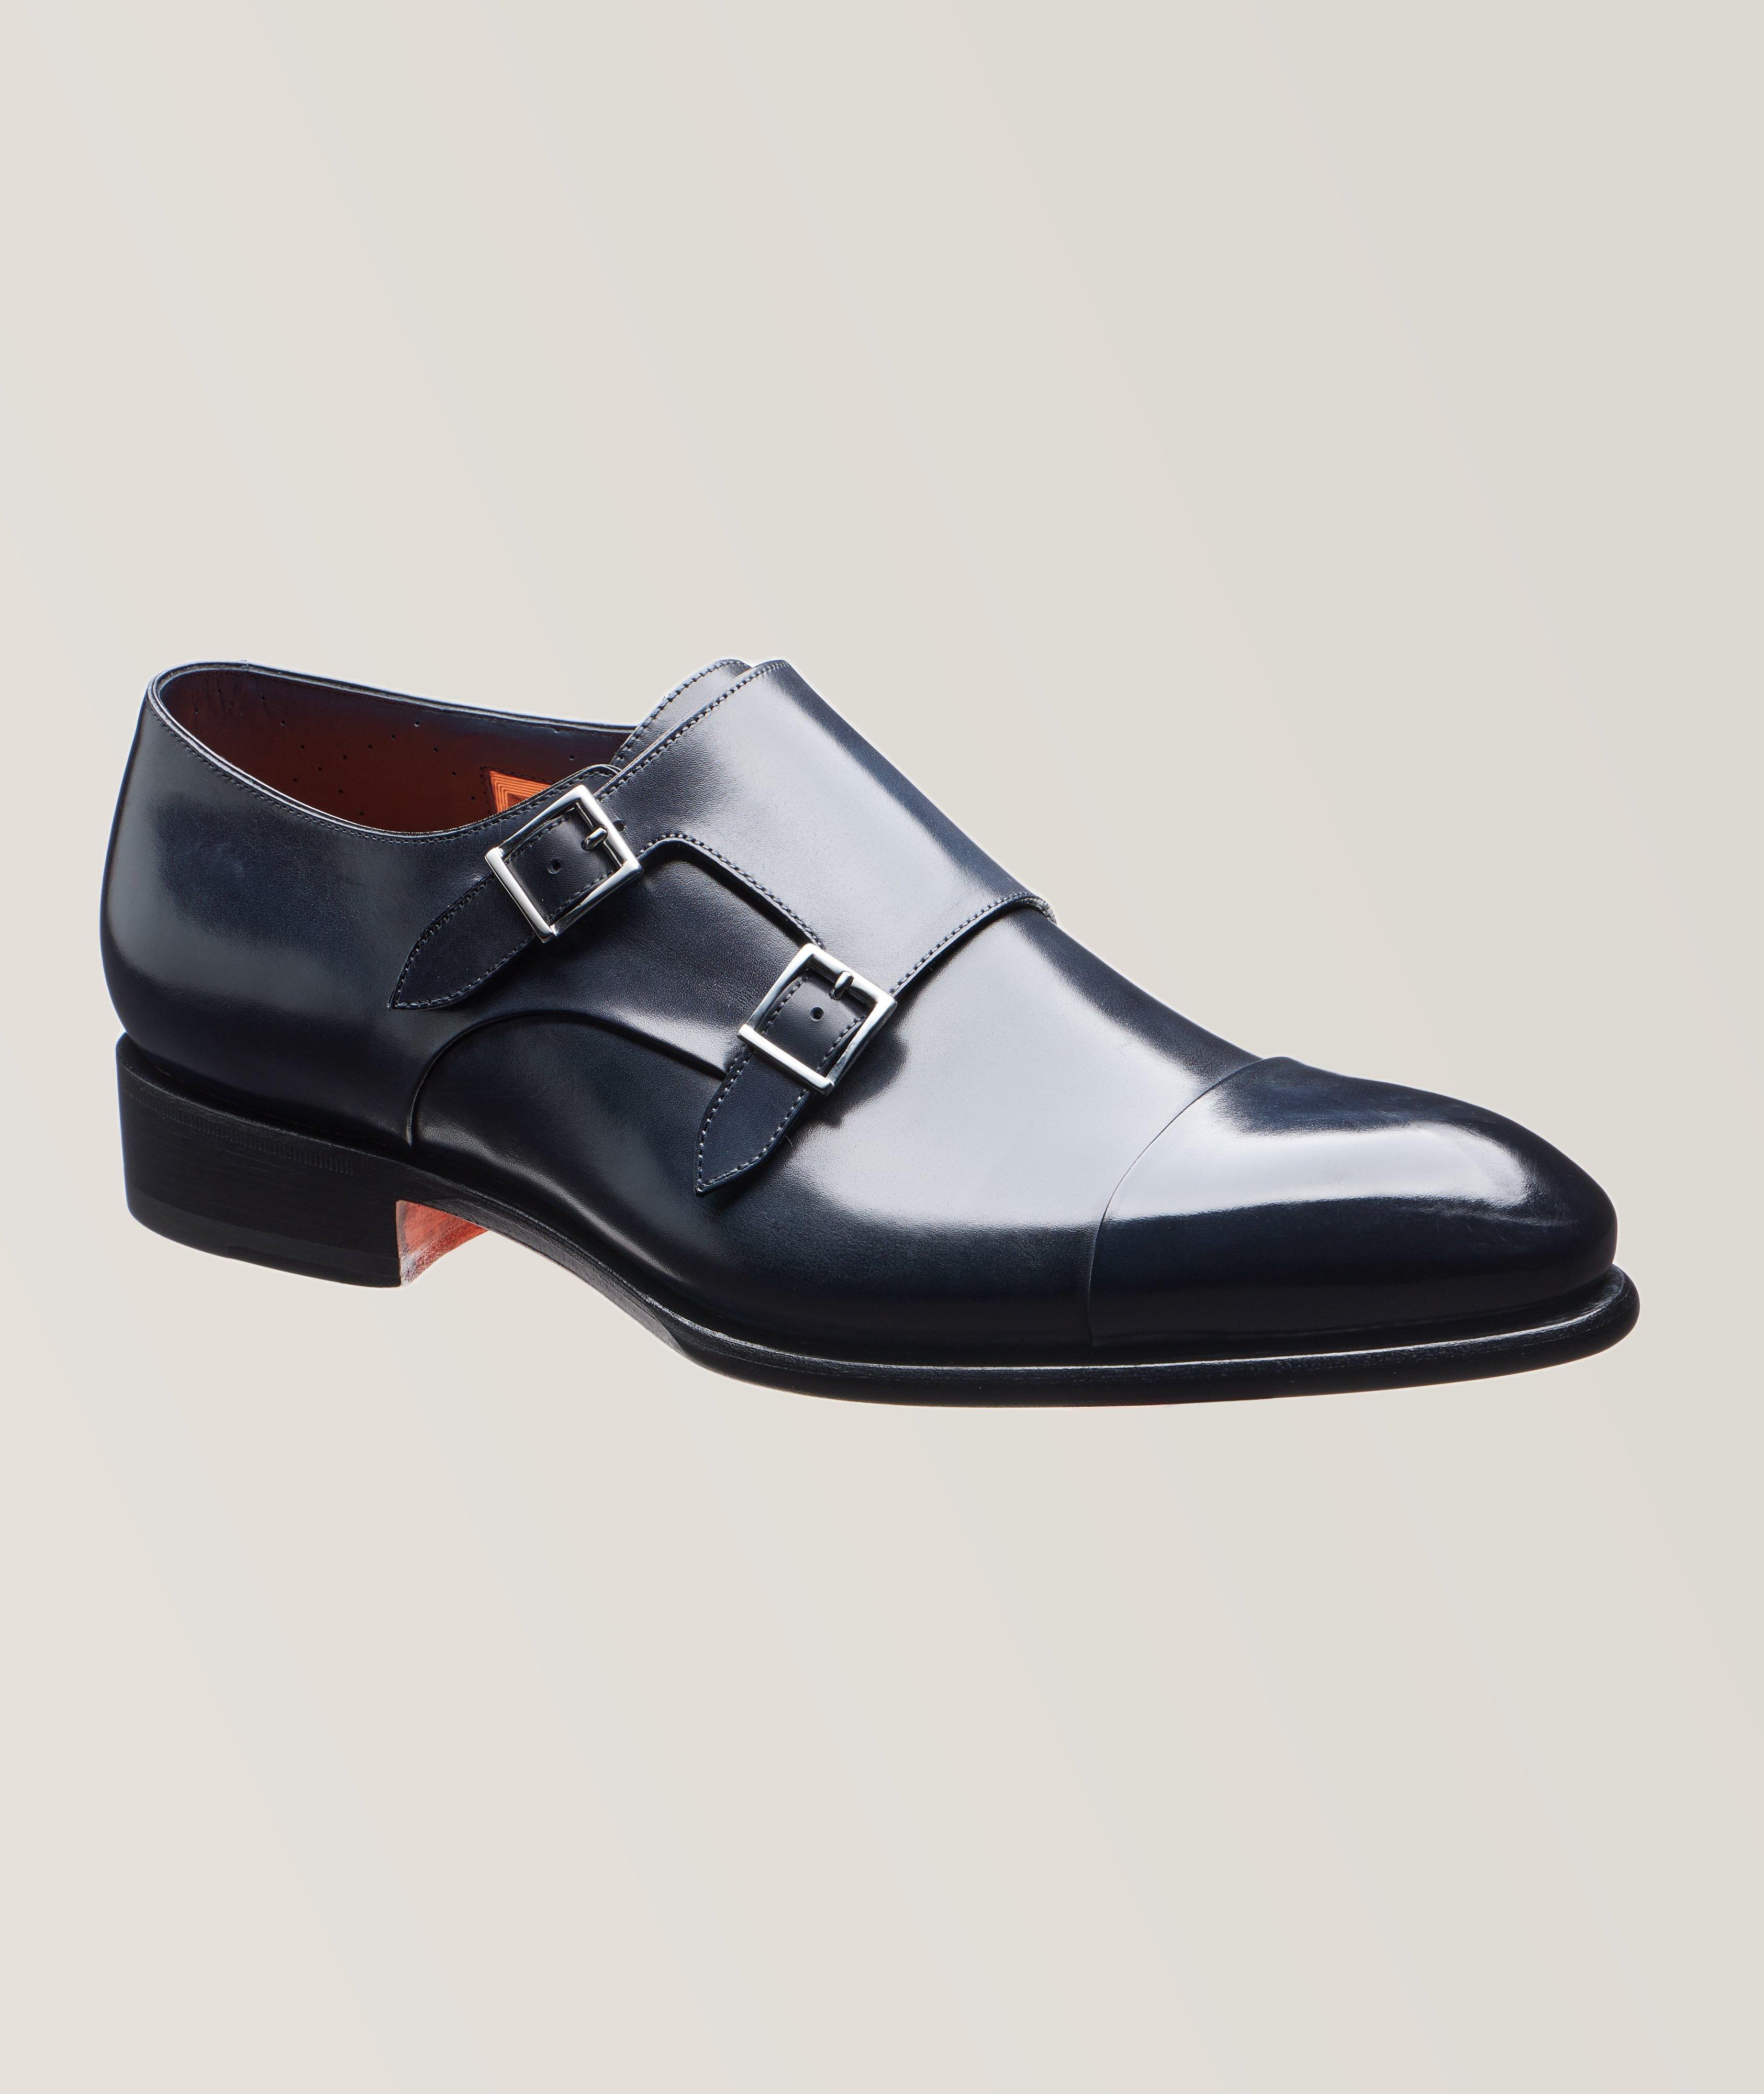 Burnished Leather Double Monk-Strap Shoes image 0